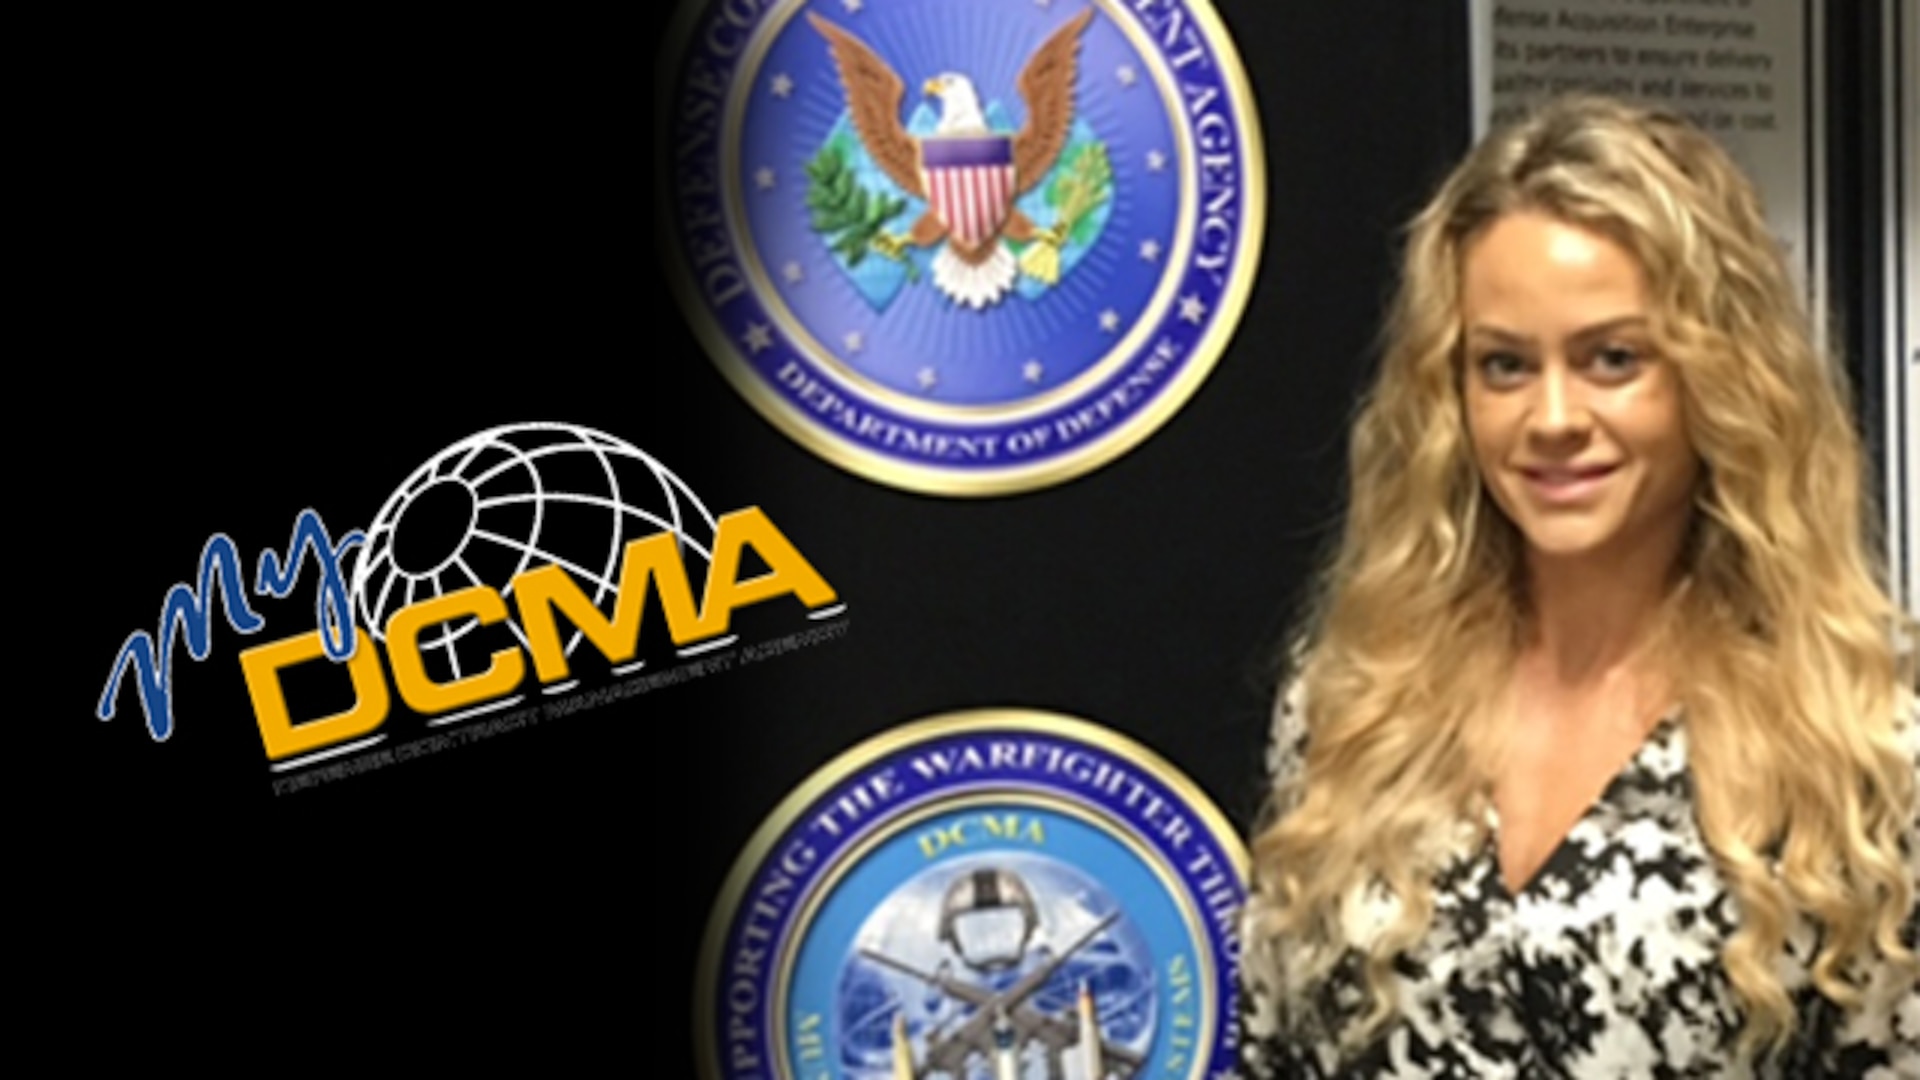 Maura Walsh is a contracts supervisory team leader at Defense Contract Management Agency Springfield in New Jersey. She has been a part of the DCMA team for eight years. (Photo courtesy of Maura Walsh)